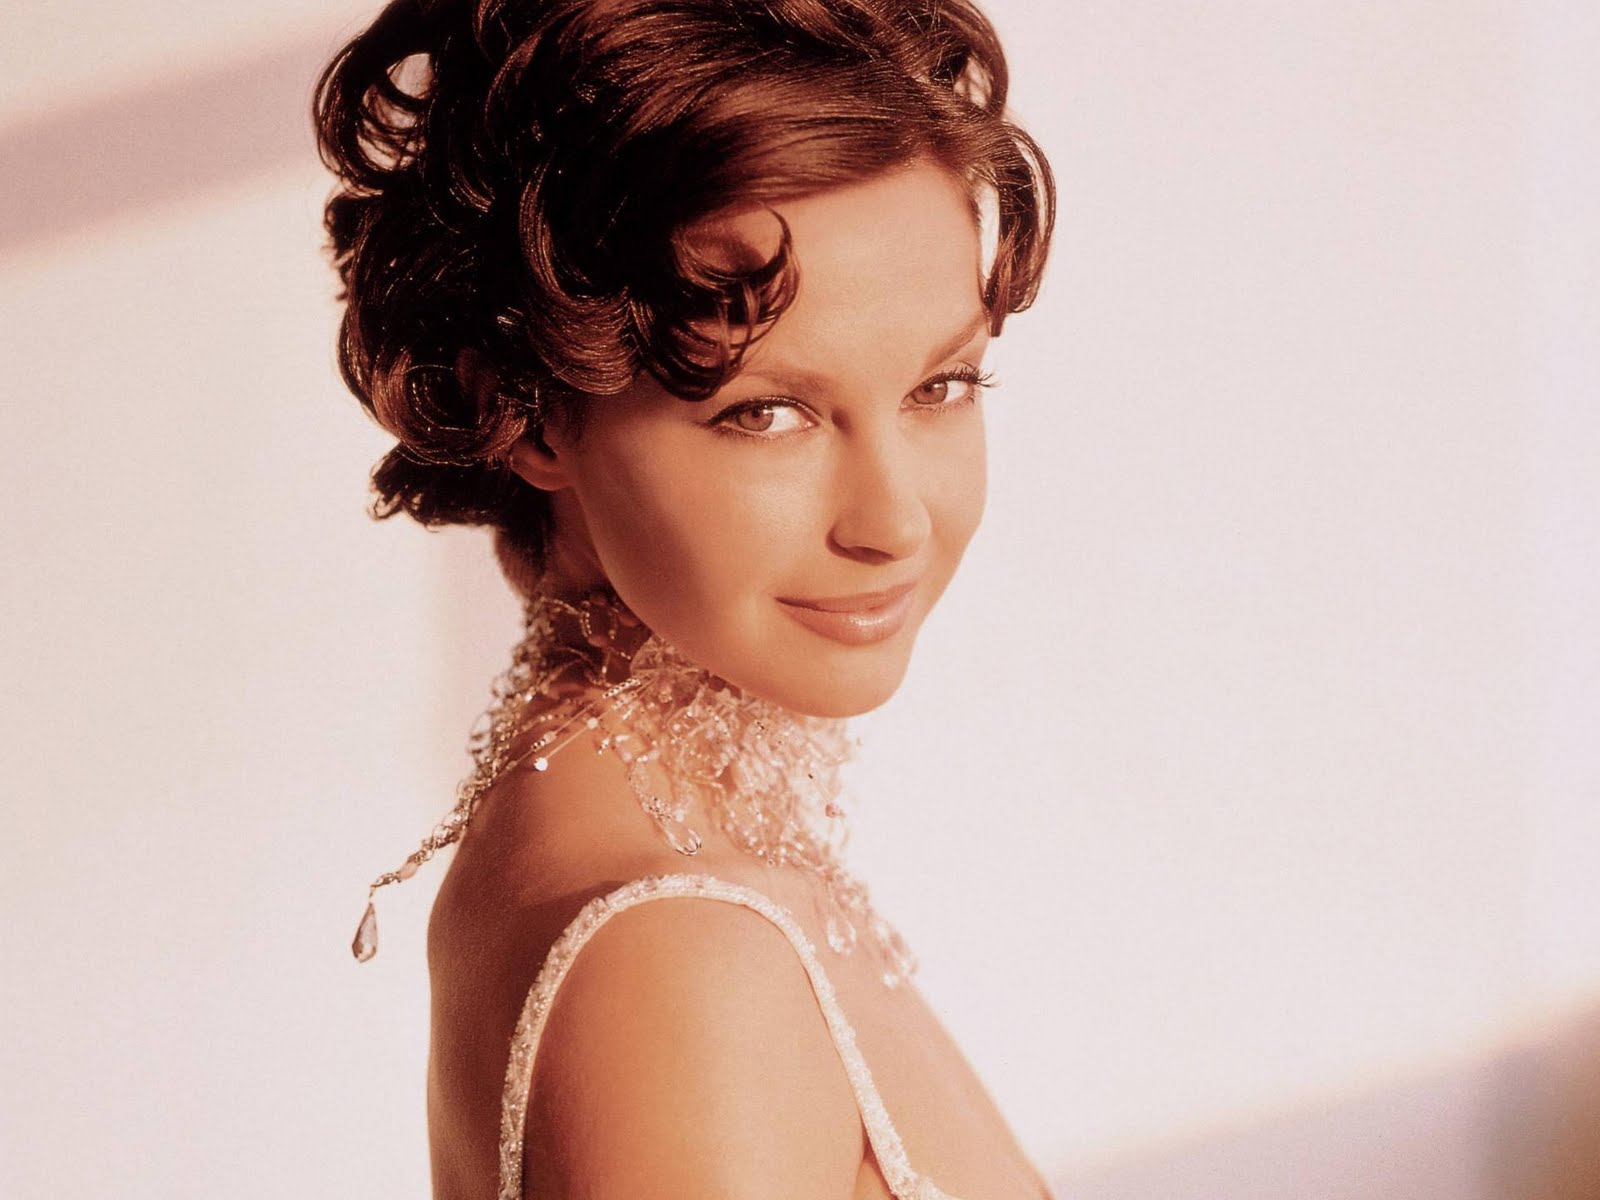 Ashley Judd Hot Pictures, Photo Gallery & Wallpapers1600 x 1200